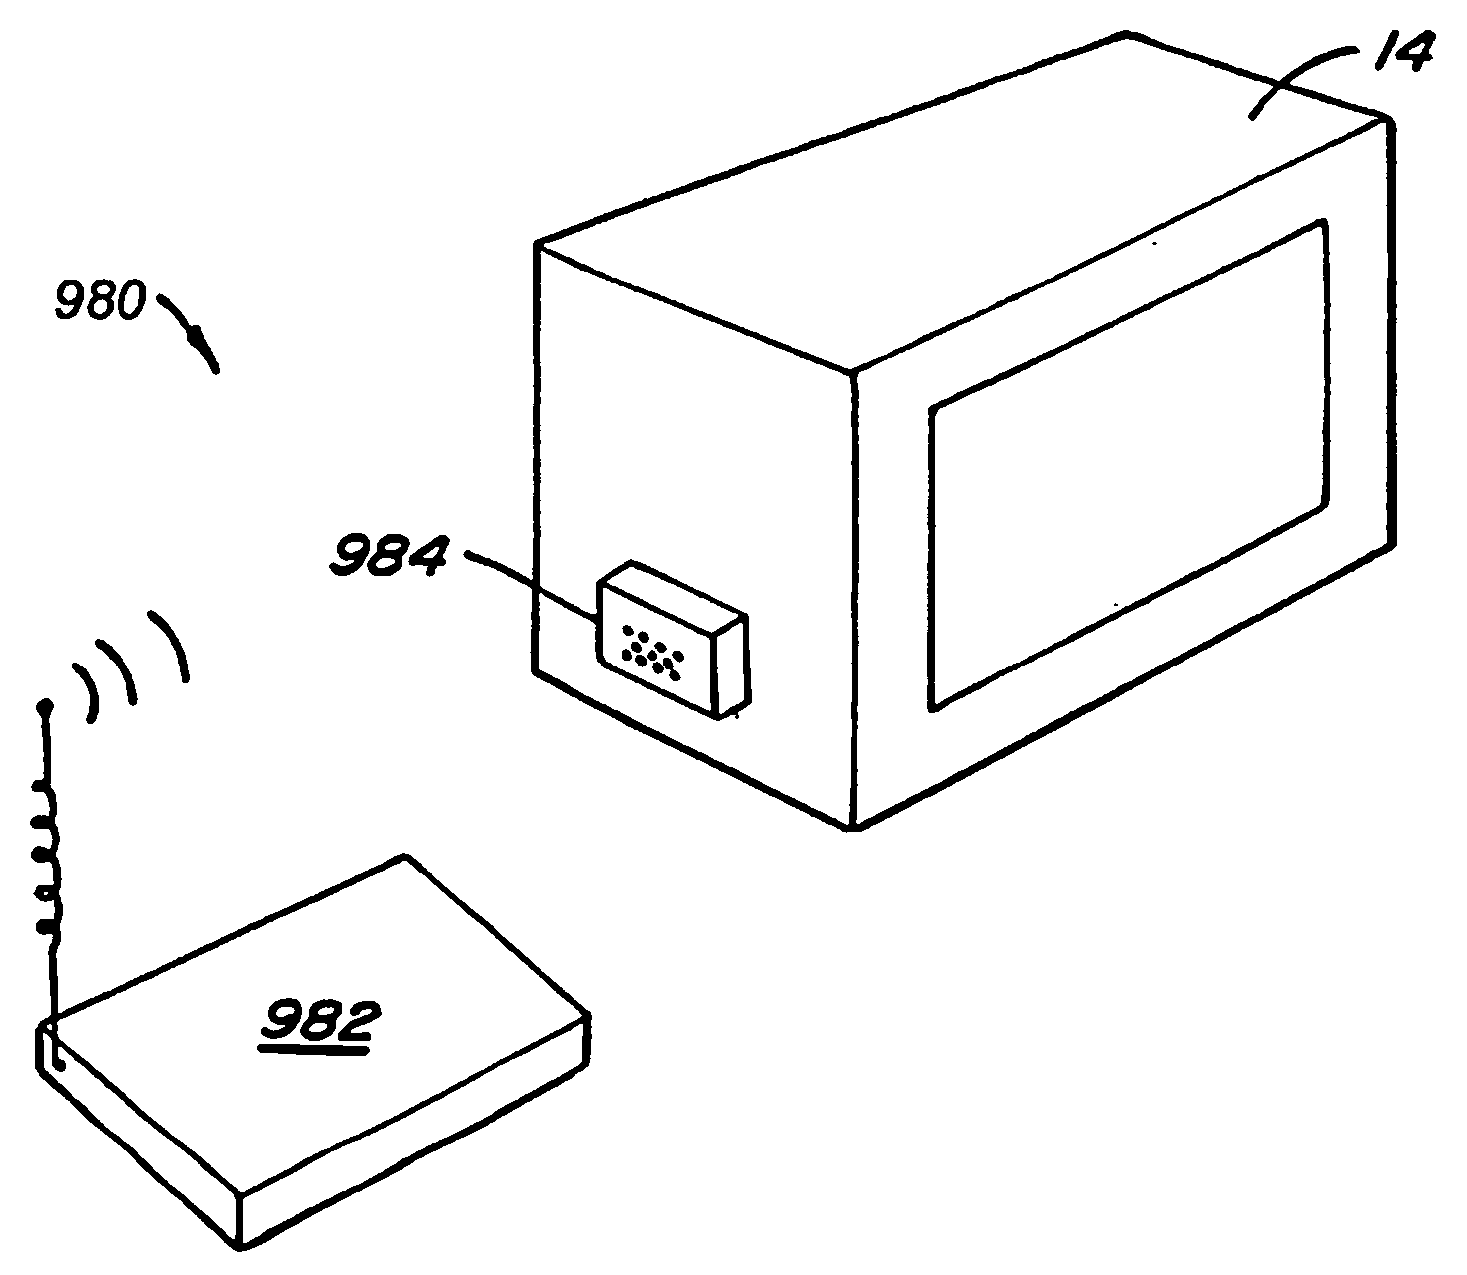 Computer physical security device